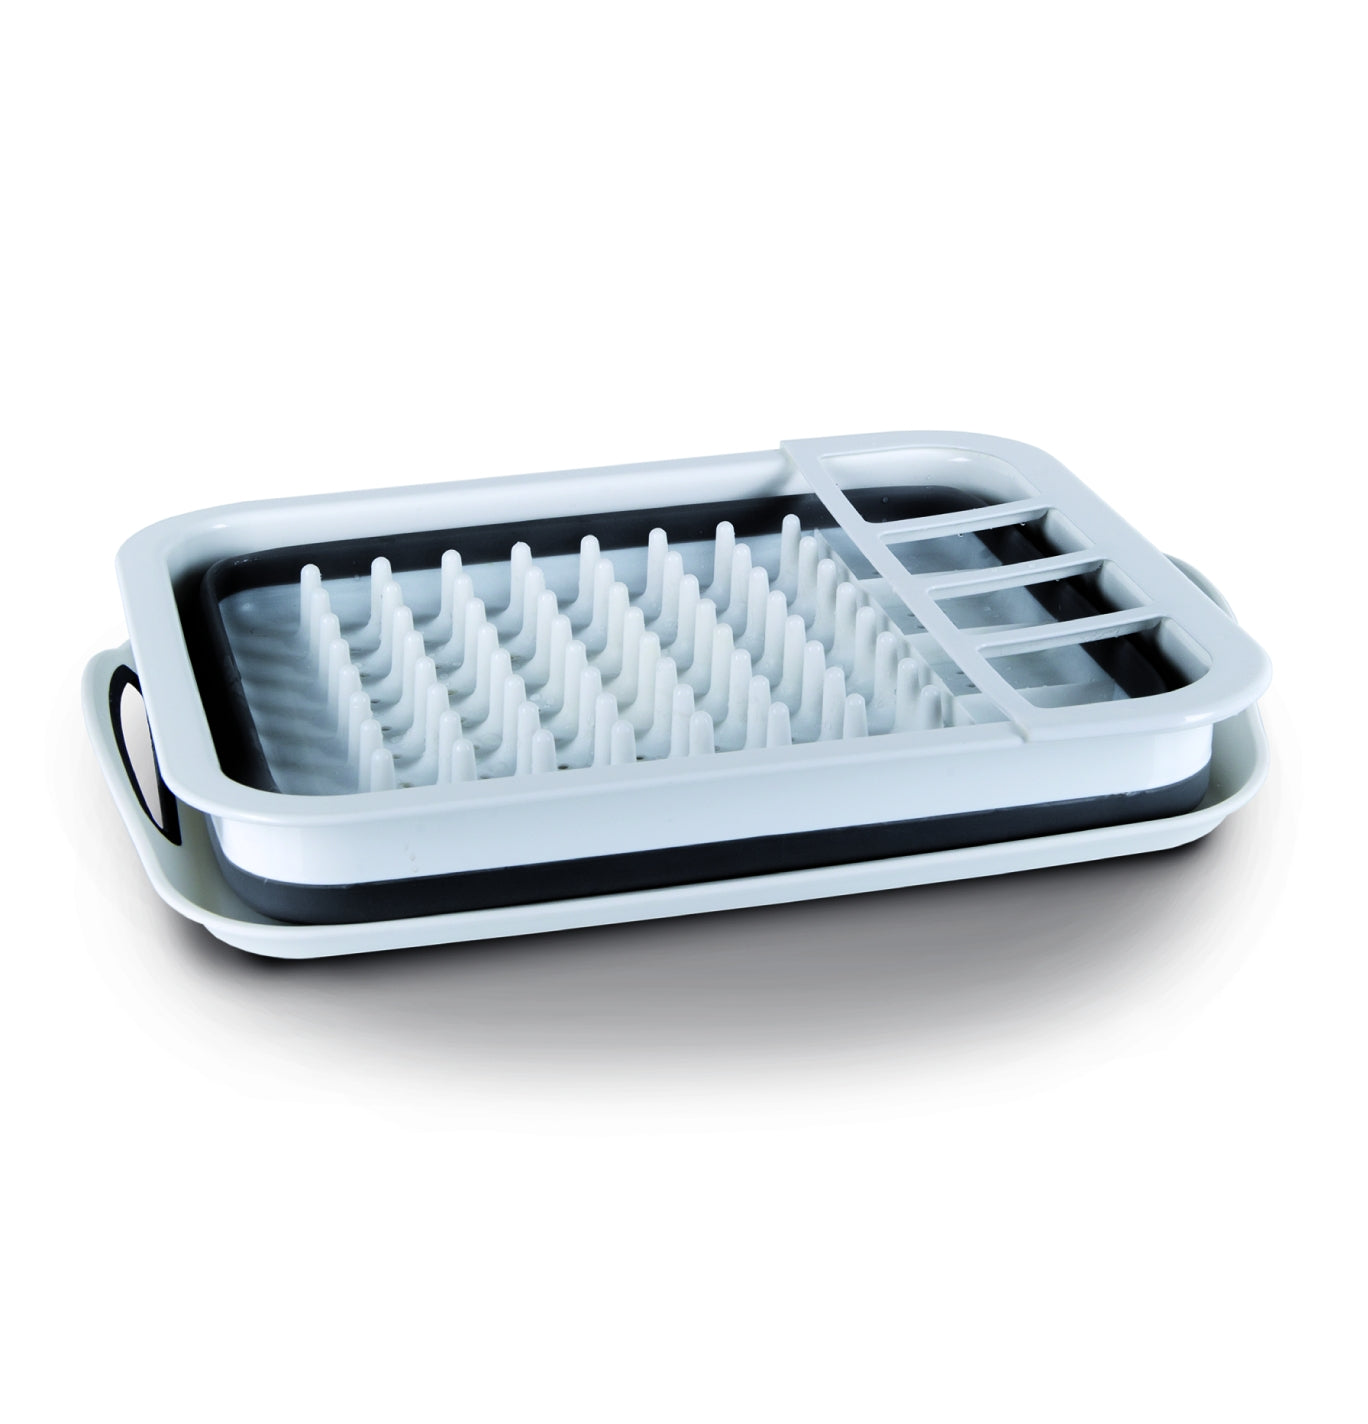 Reimo Camp4 Foldable Dish Drainer & Drip Tray Image